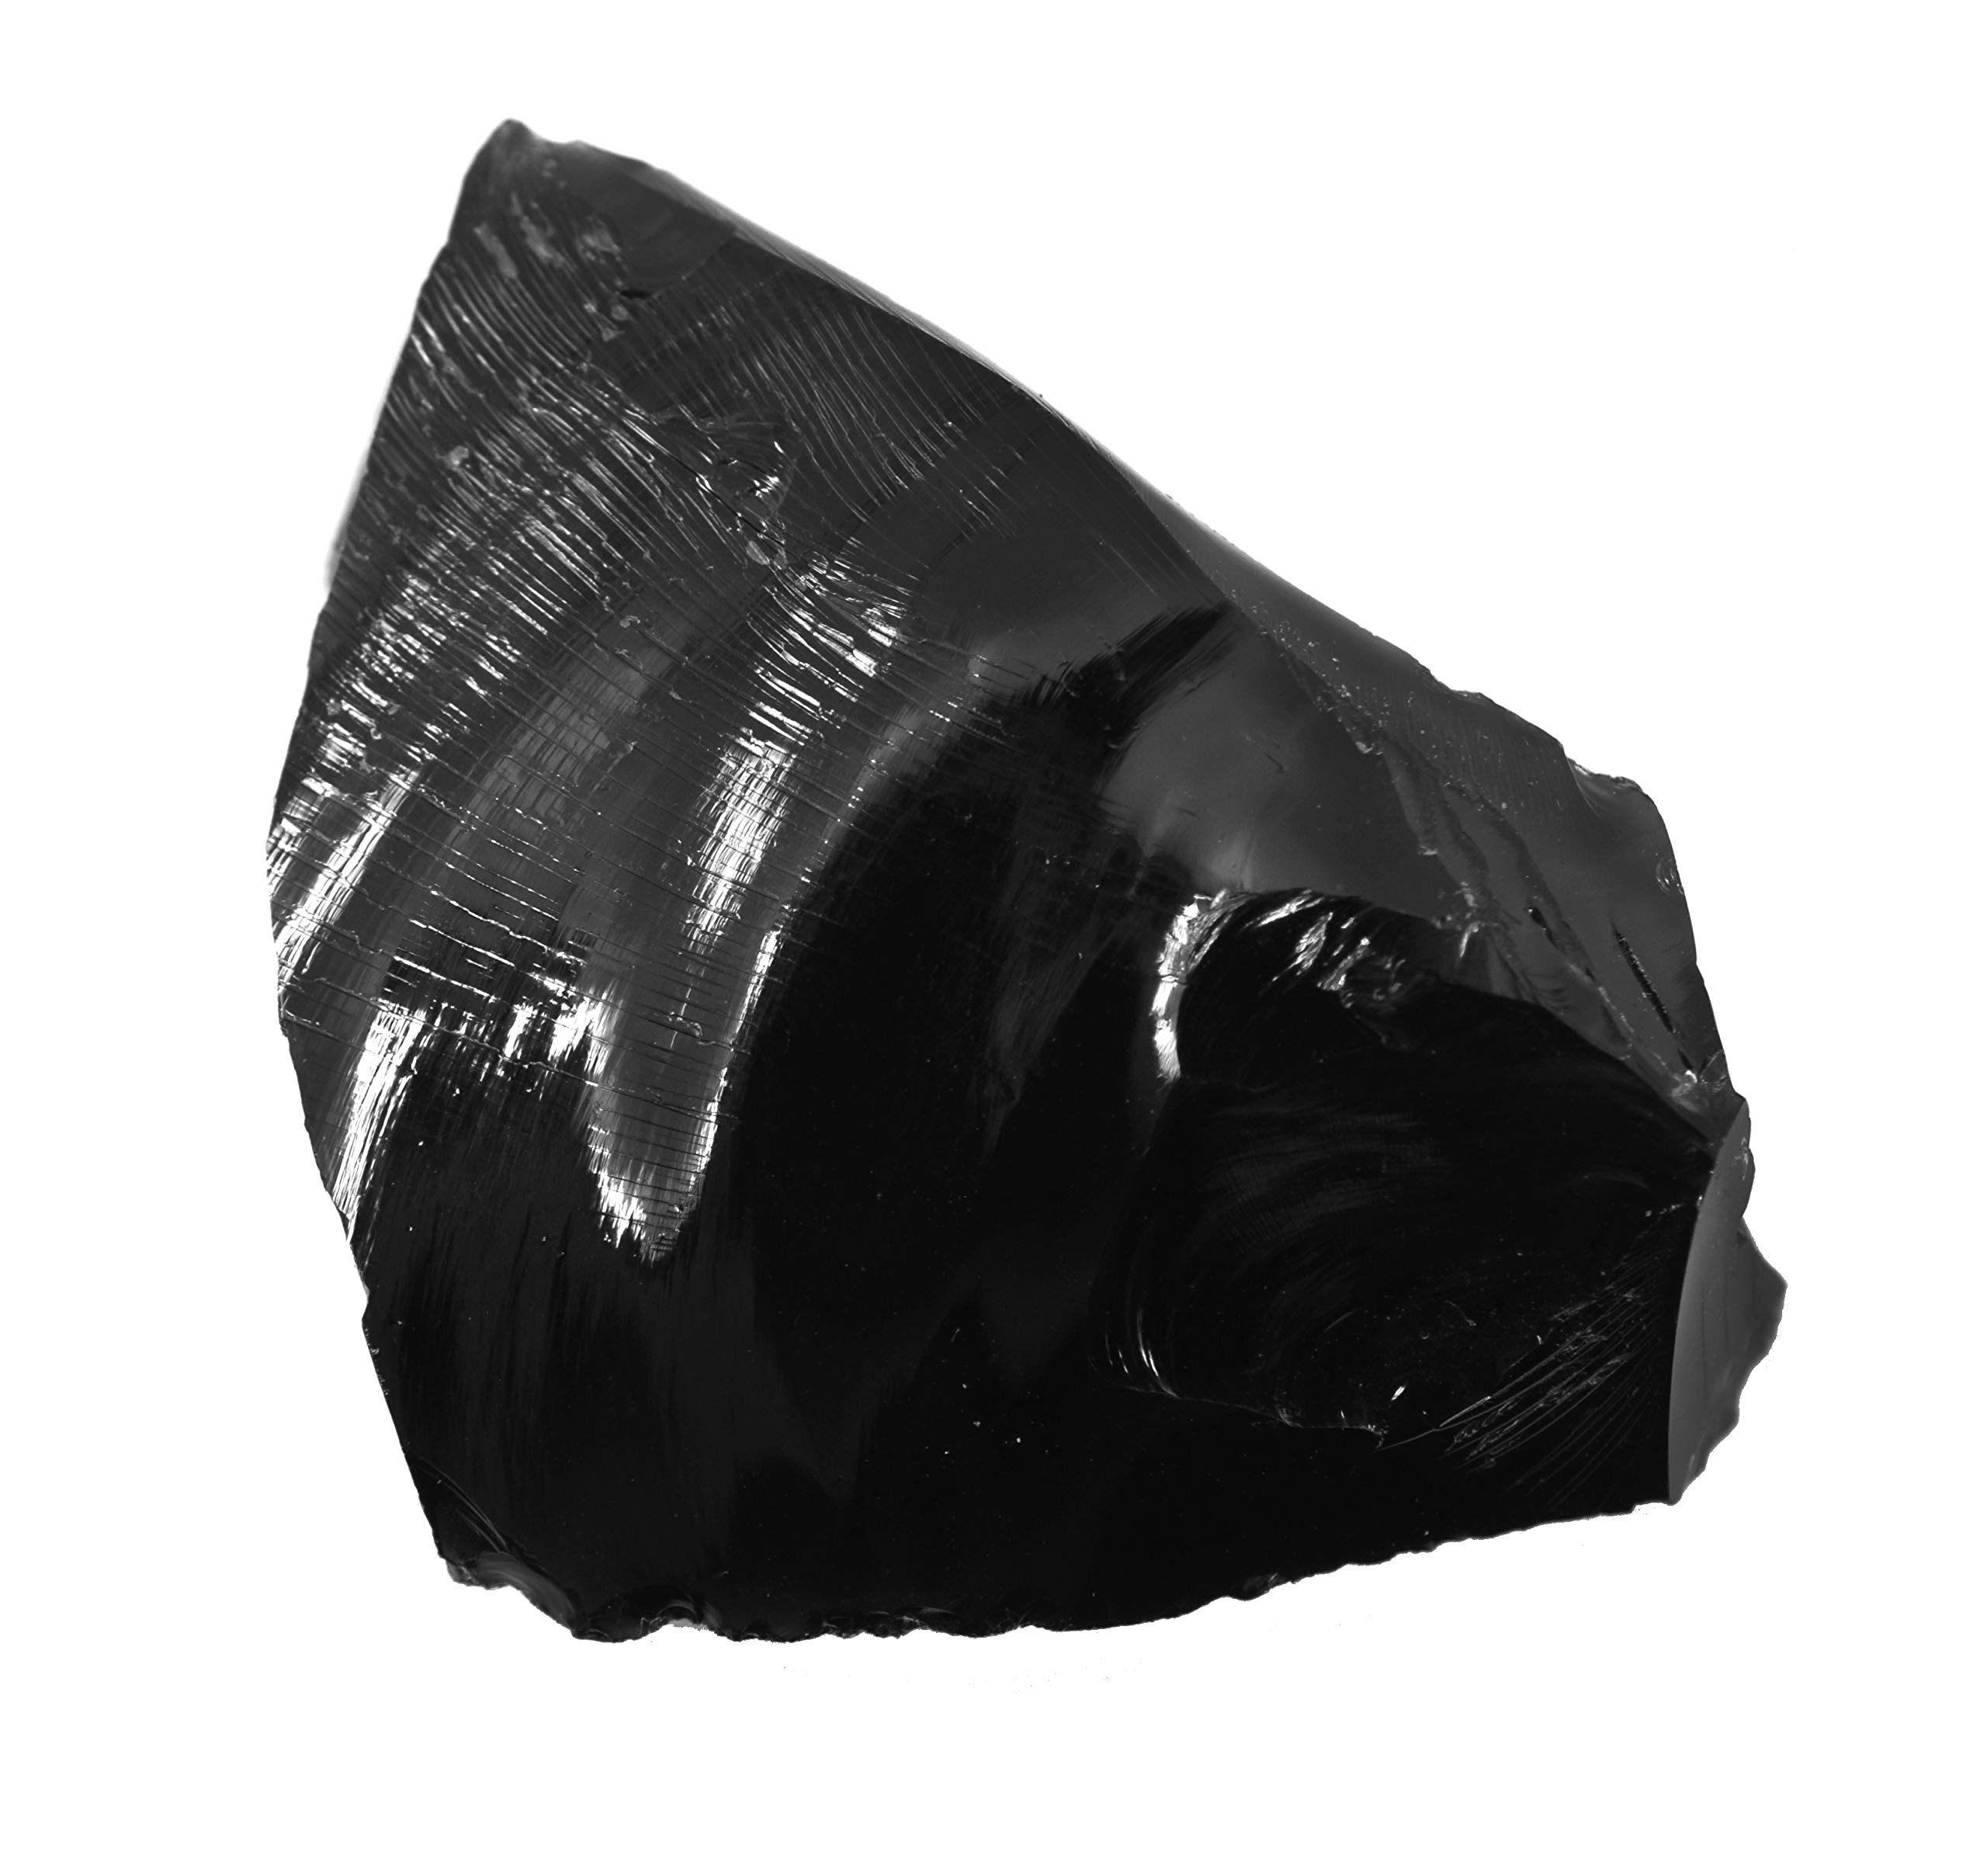 <p>What type of fracturing happens to obsidian?</p>